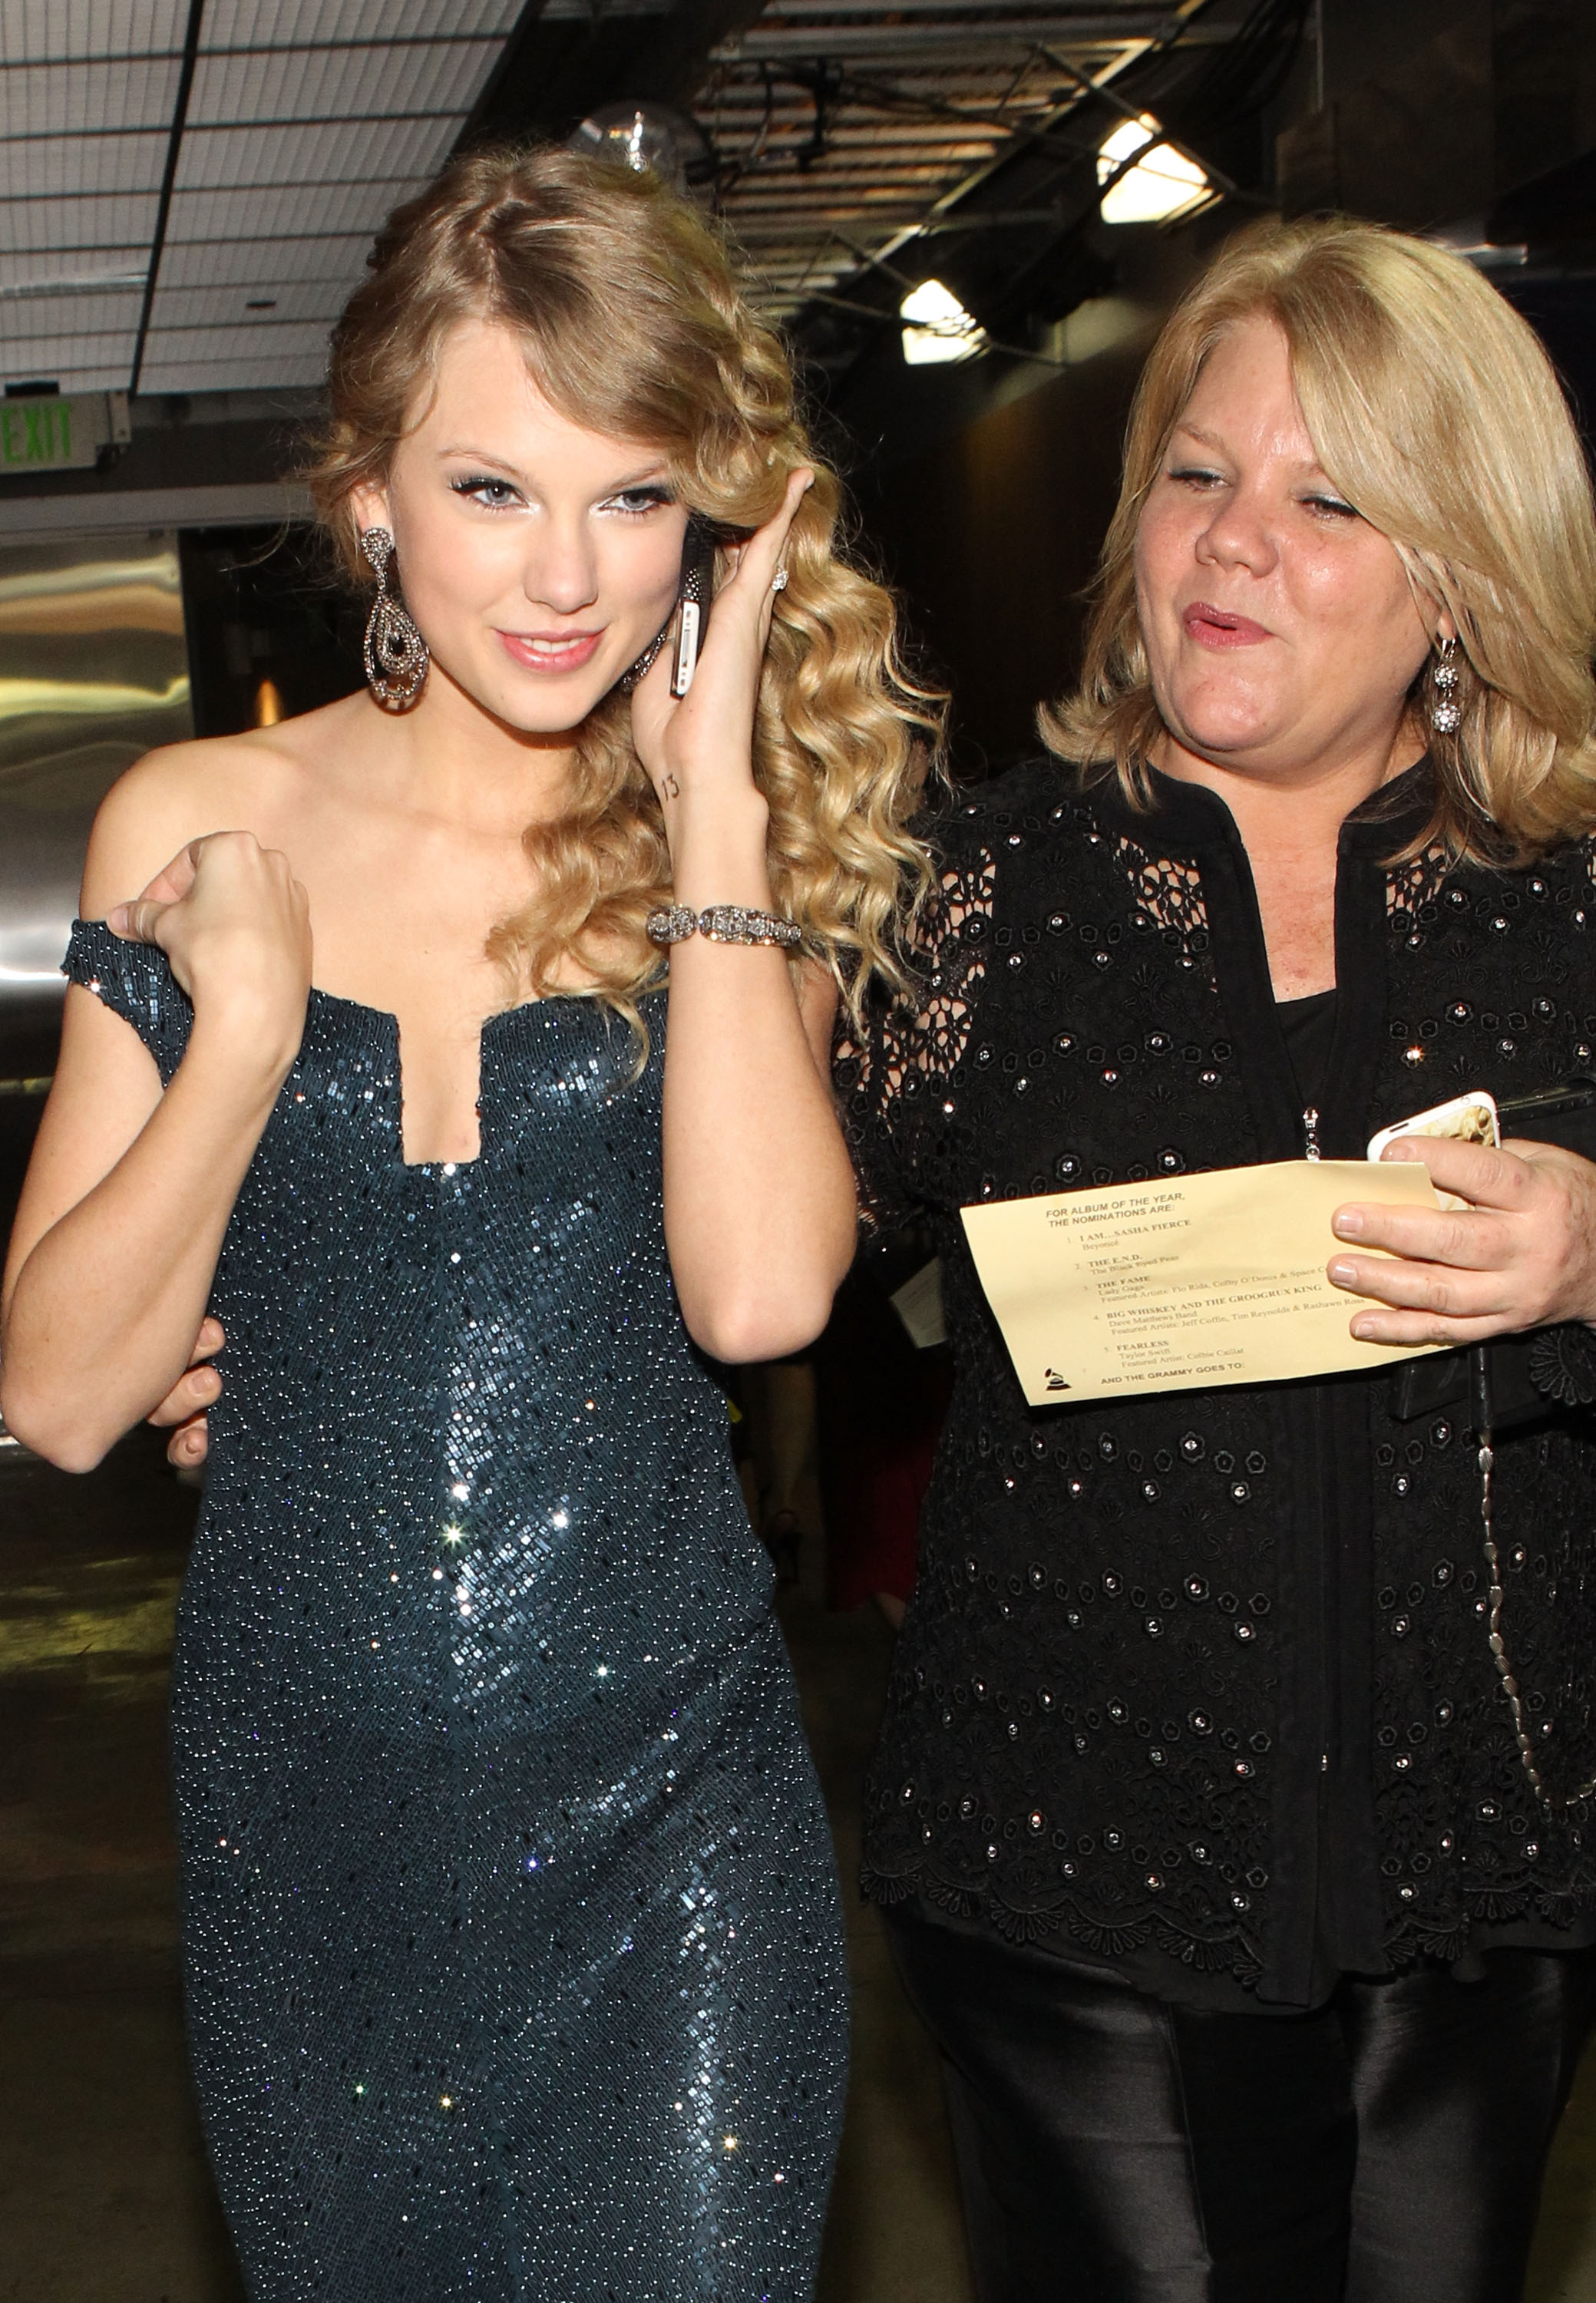 Taylor Swift and Andrea Swift backstage during the 52nd Annual GRAMMY Awards in Los Angeles, California, on January 31, 2010. | Source: Getty Images